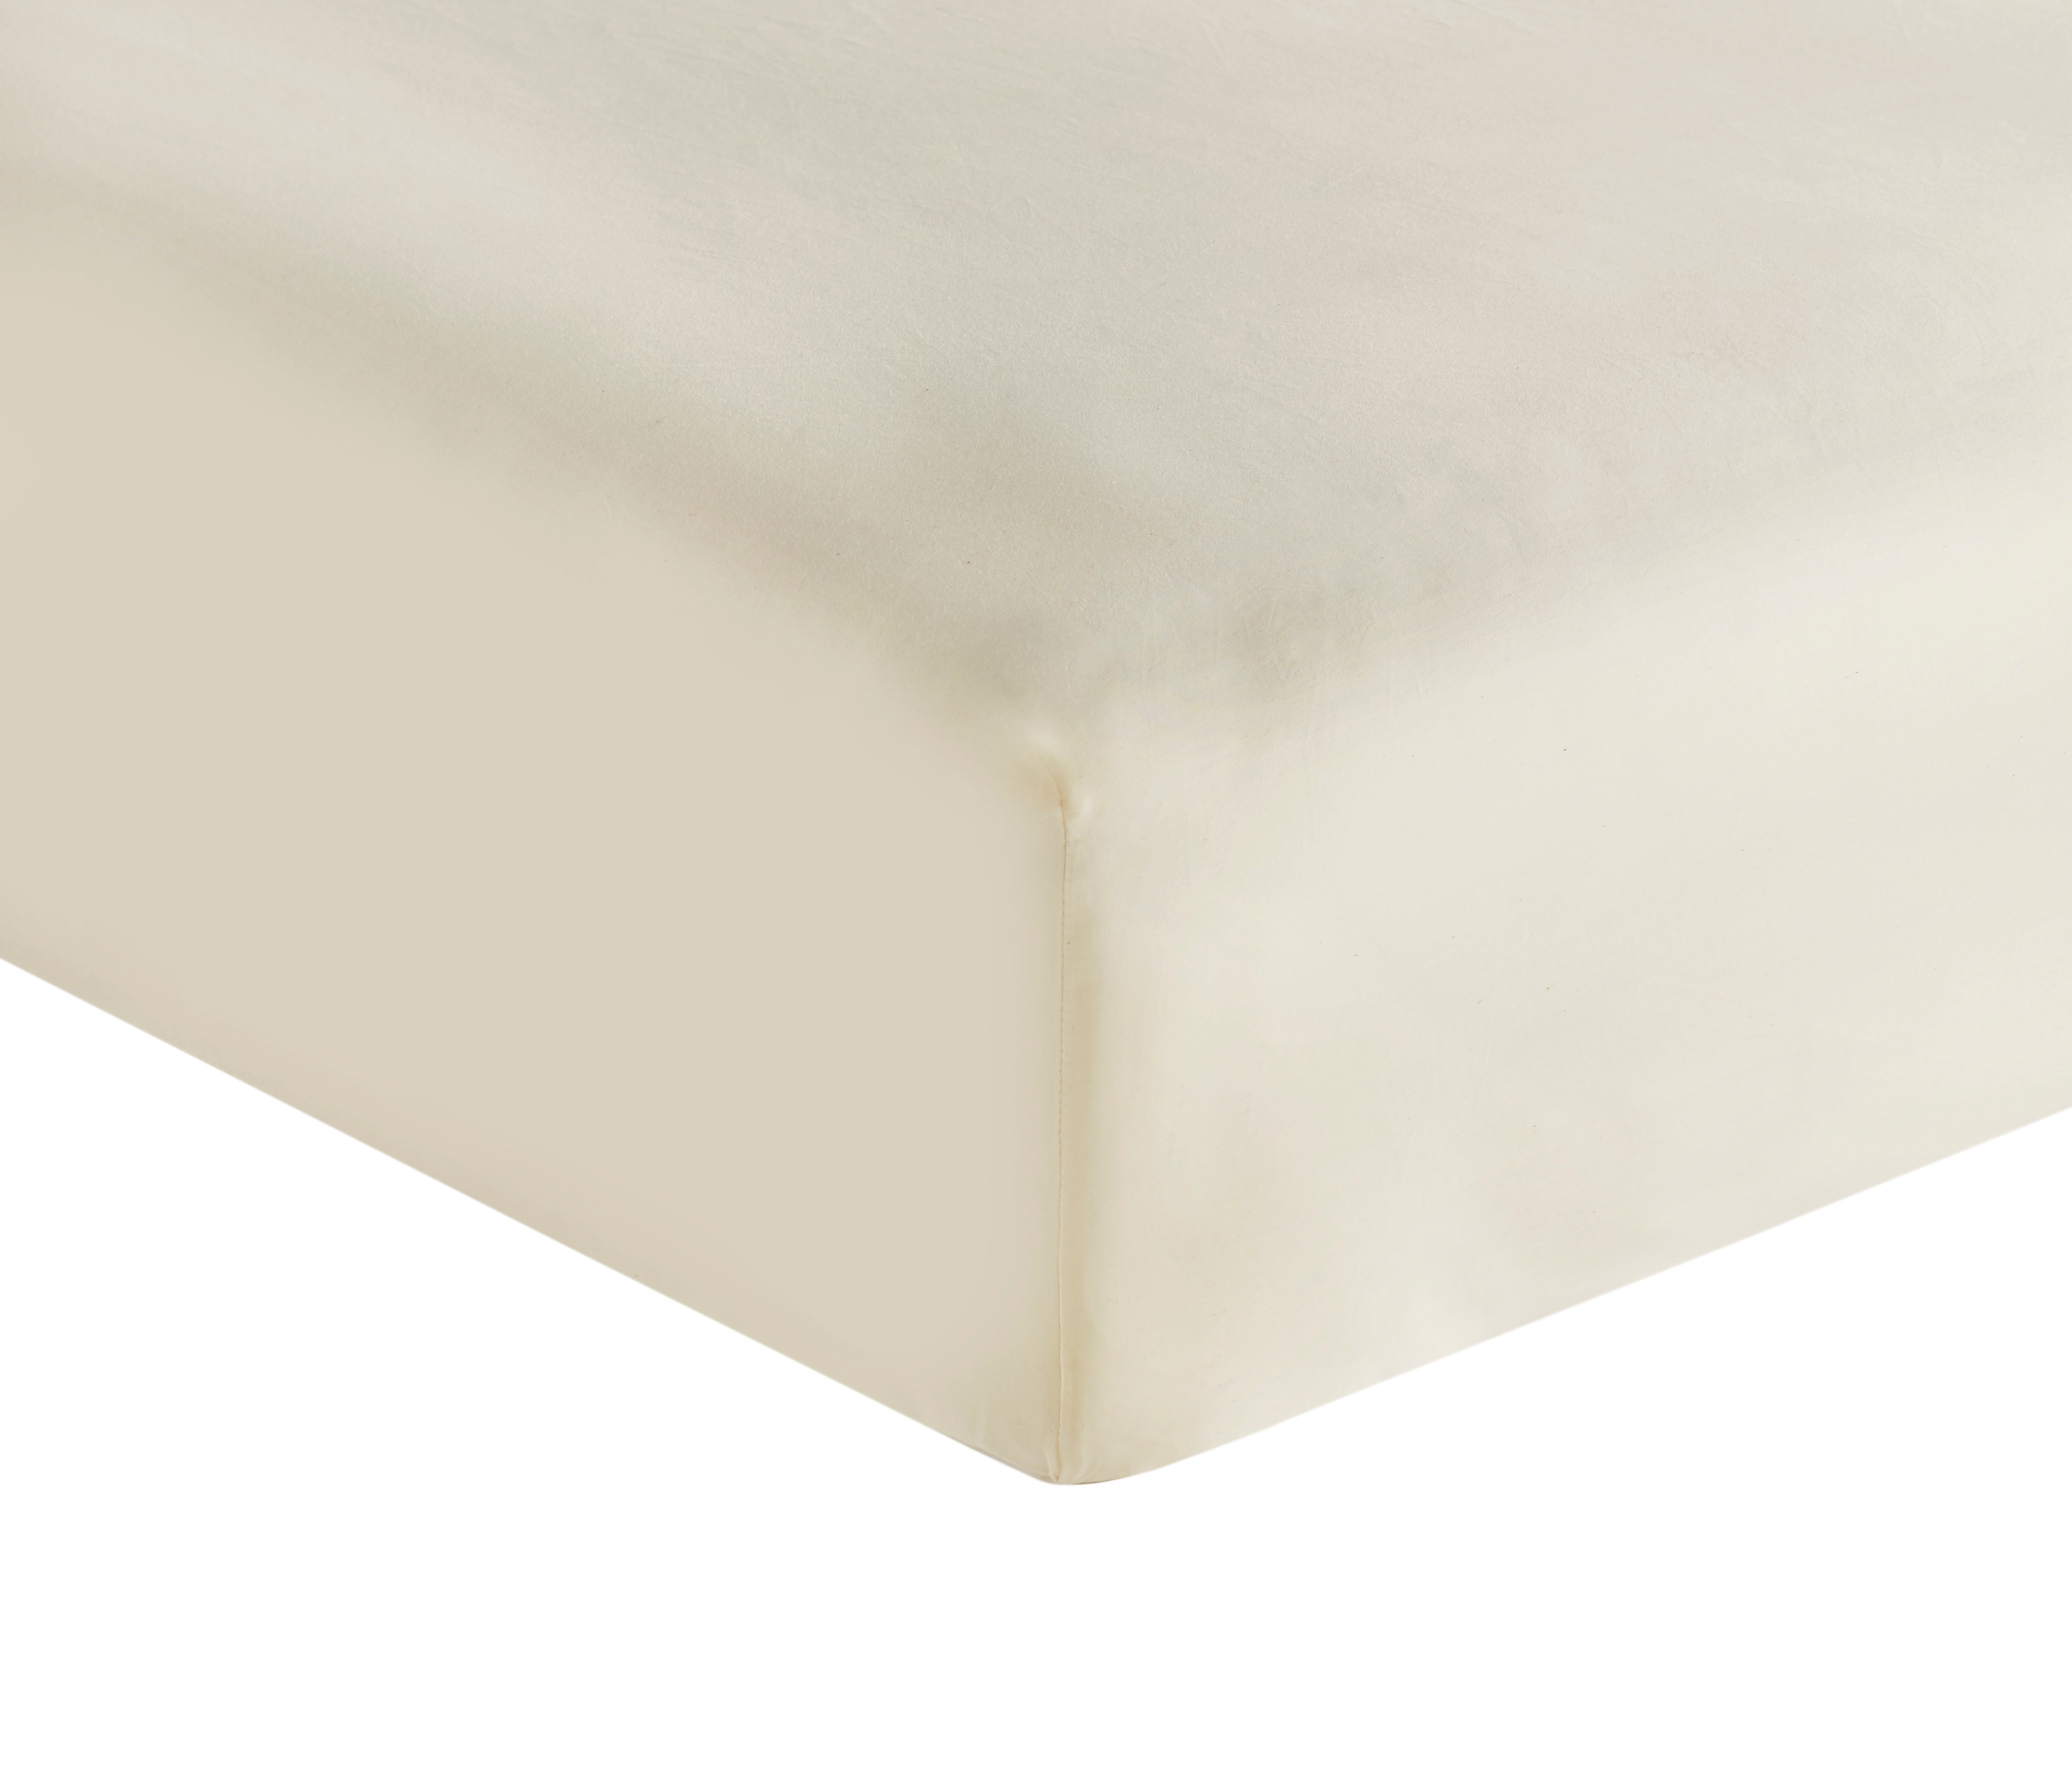 300 Thread Count Organic Fitted Sheet - Sateen